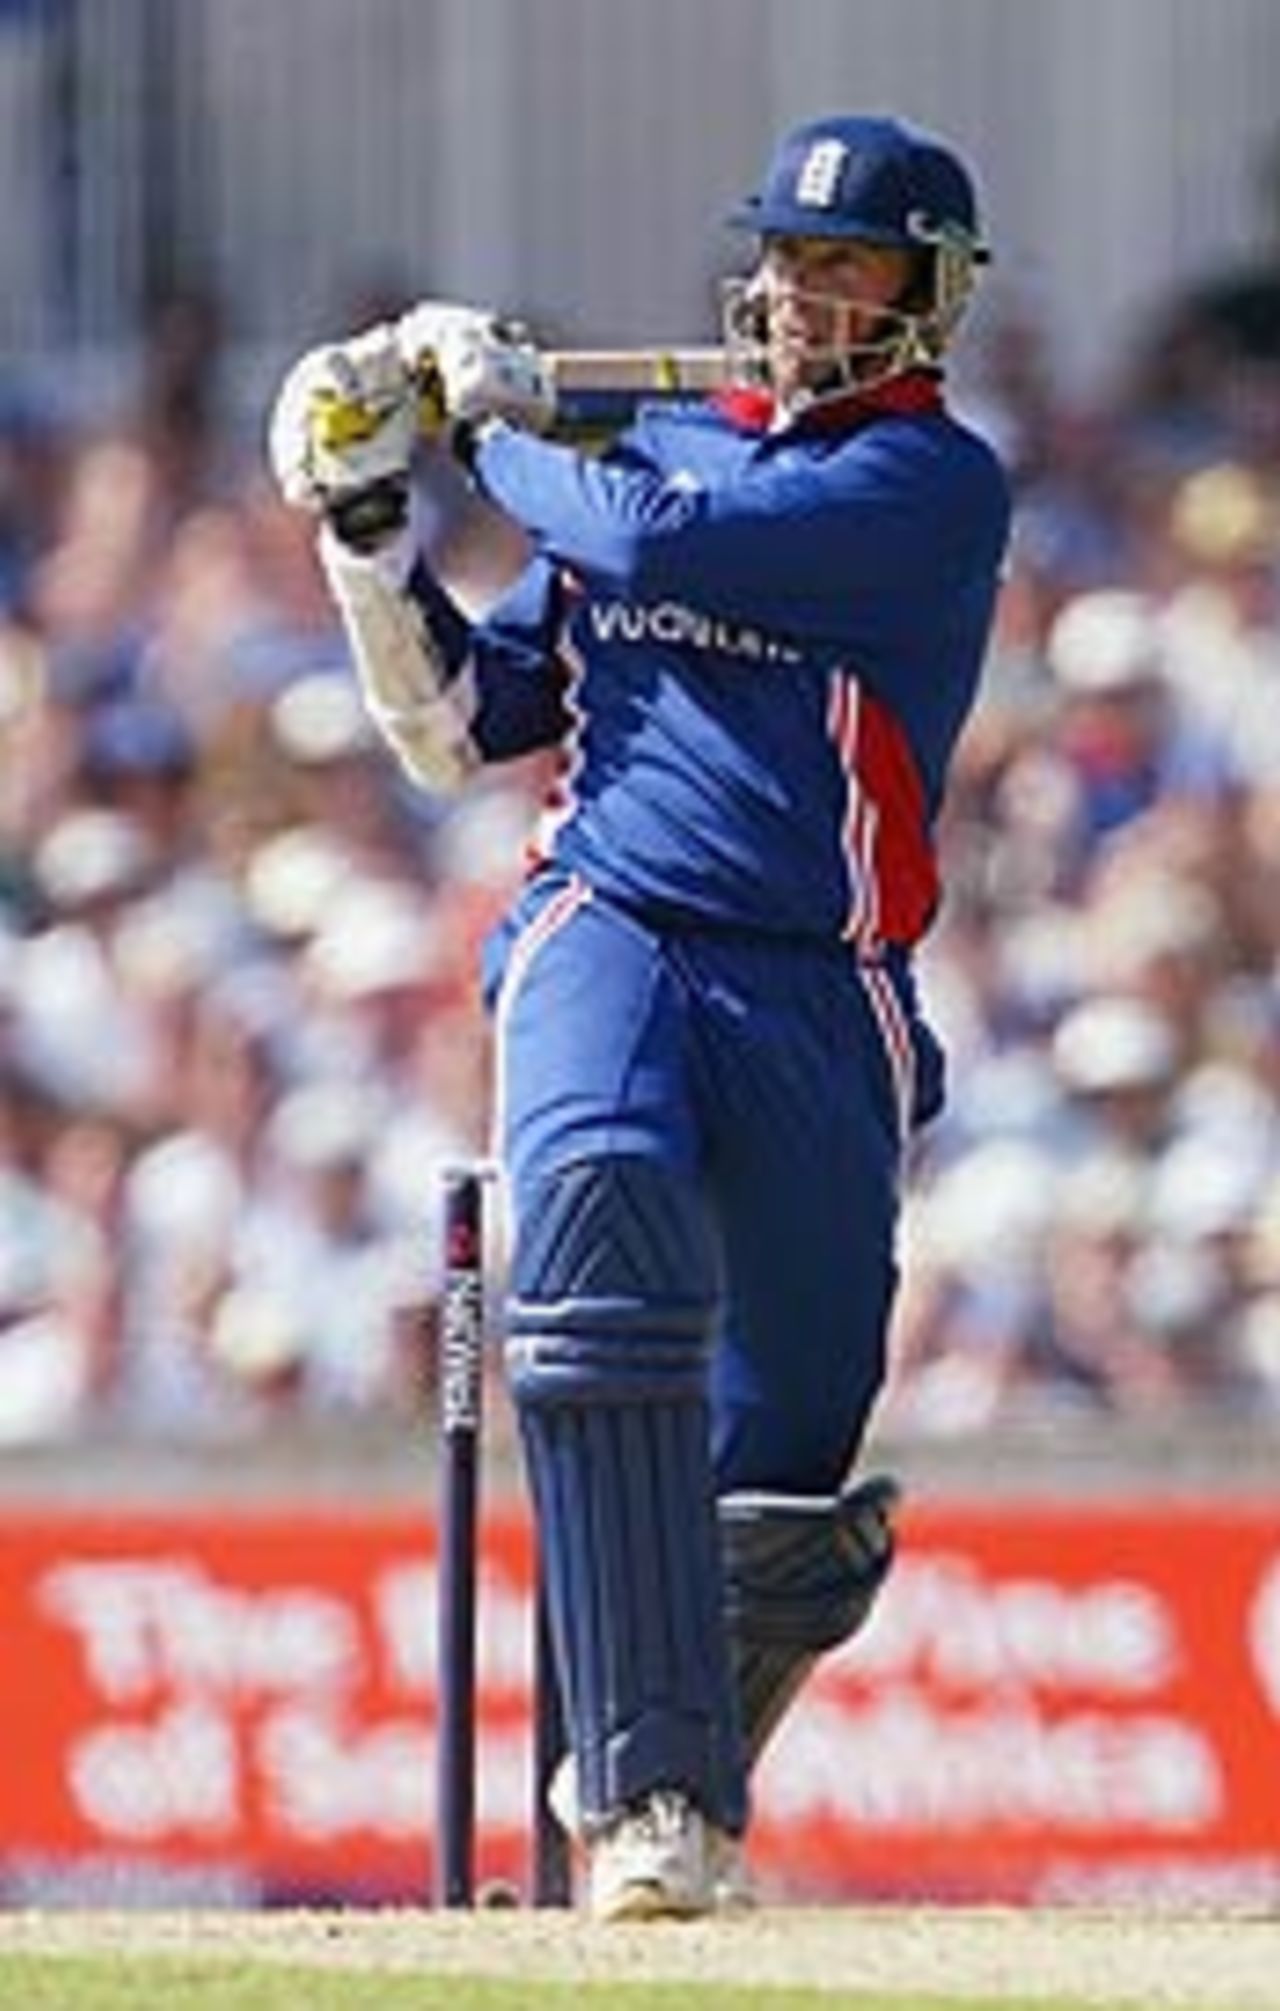 Marcus Trescothick on his way to a hundred, England v South Africa, The Oval, June 28, 2003